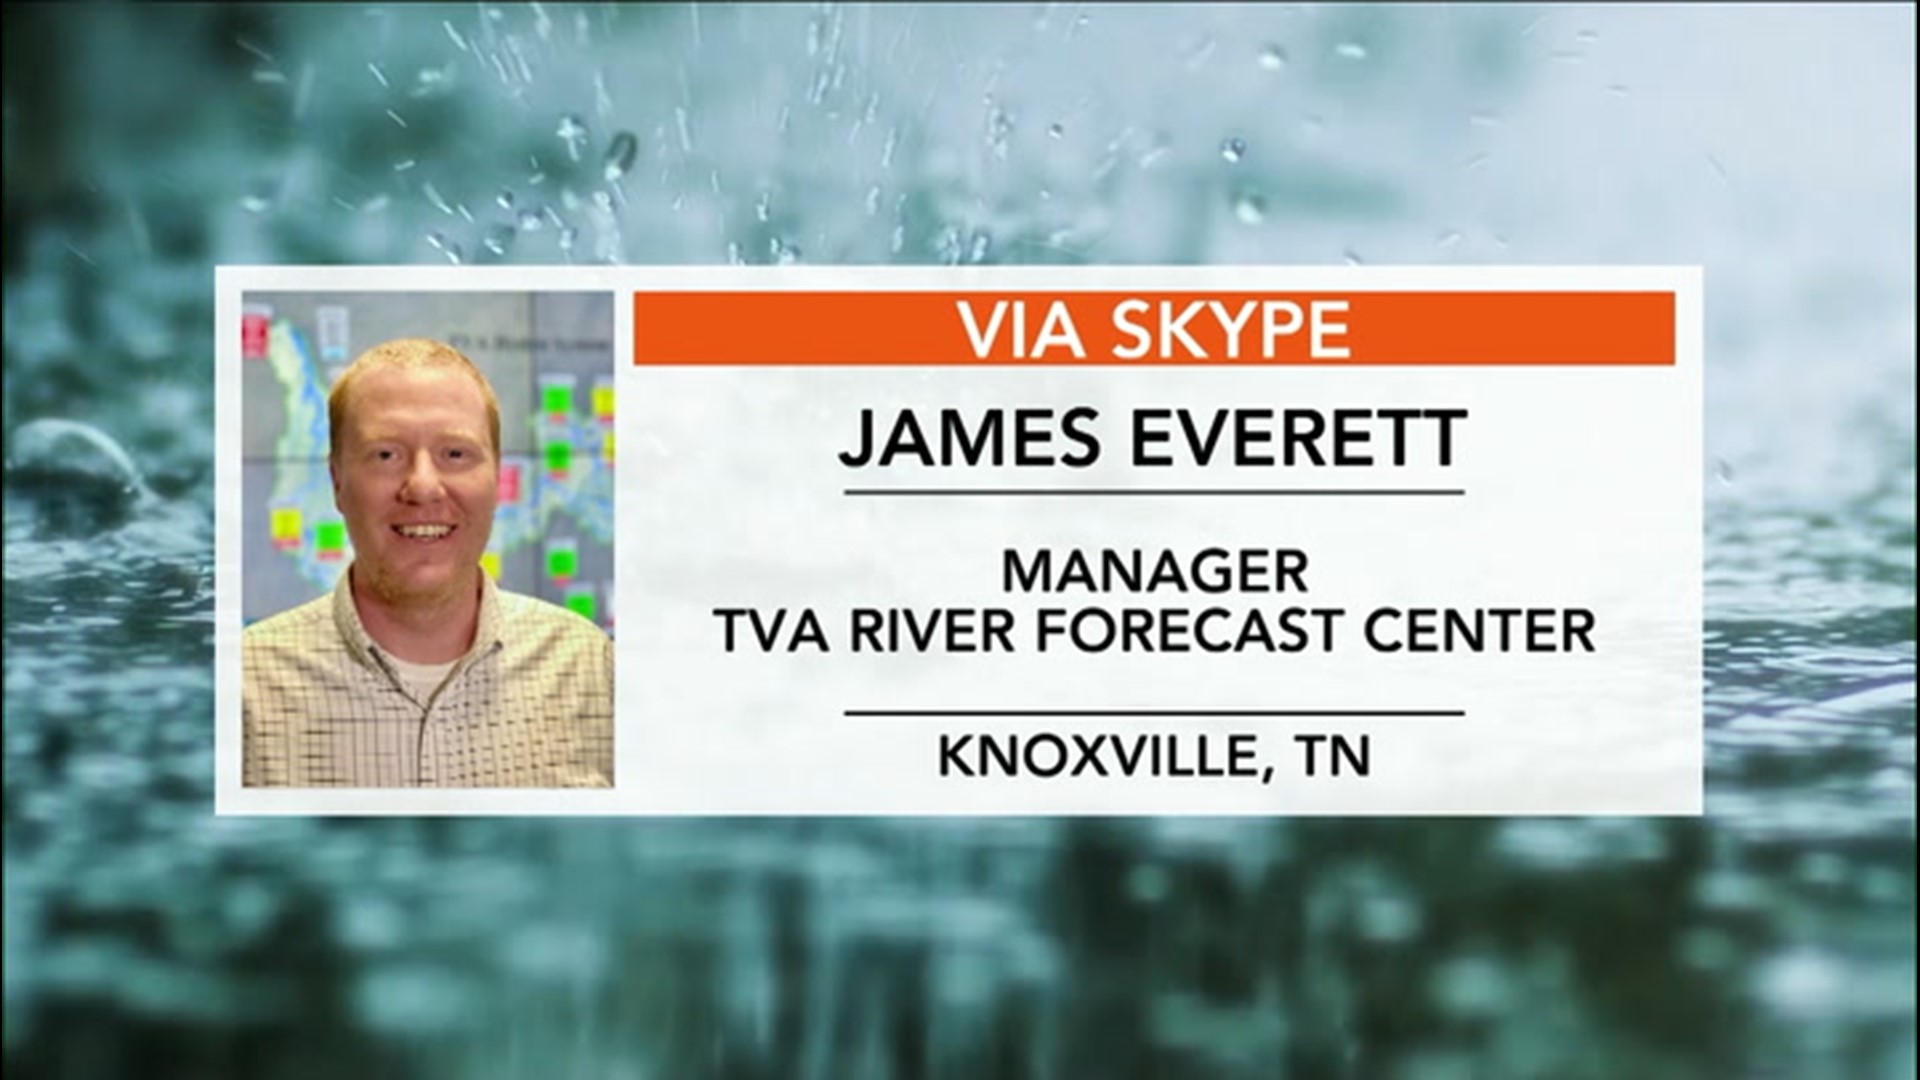 AccuWeather has James Everett, manager at the TVA River Forecast Center in Knoxville, Tennessee, on Skype to talk about the steps for flood mitigation.